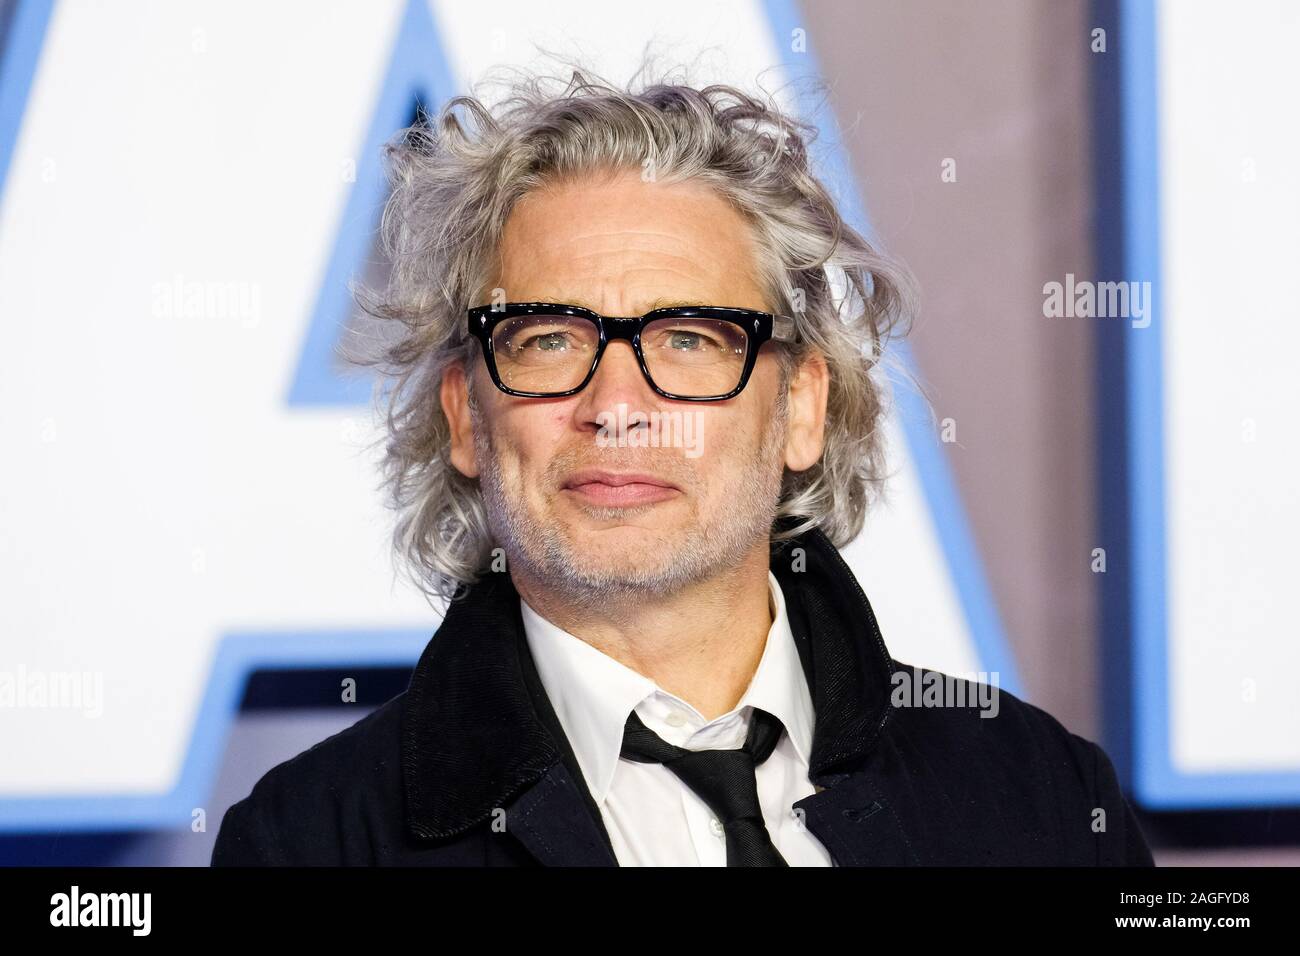 Cineworld Leicester Square, London, UK. 18 December 2019.  Dexter Fletcher poses at European Premier of Star Wars: The Rise of Skywalker. . Picture by Julie Edwards./Alamy Live News Stock Photo